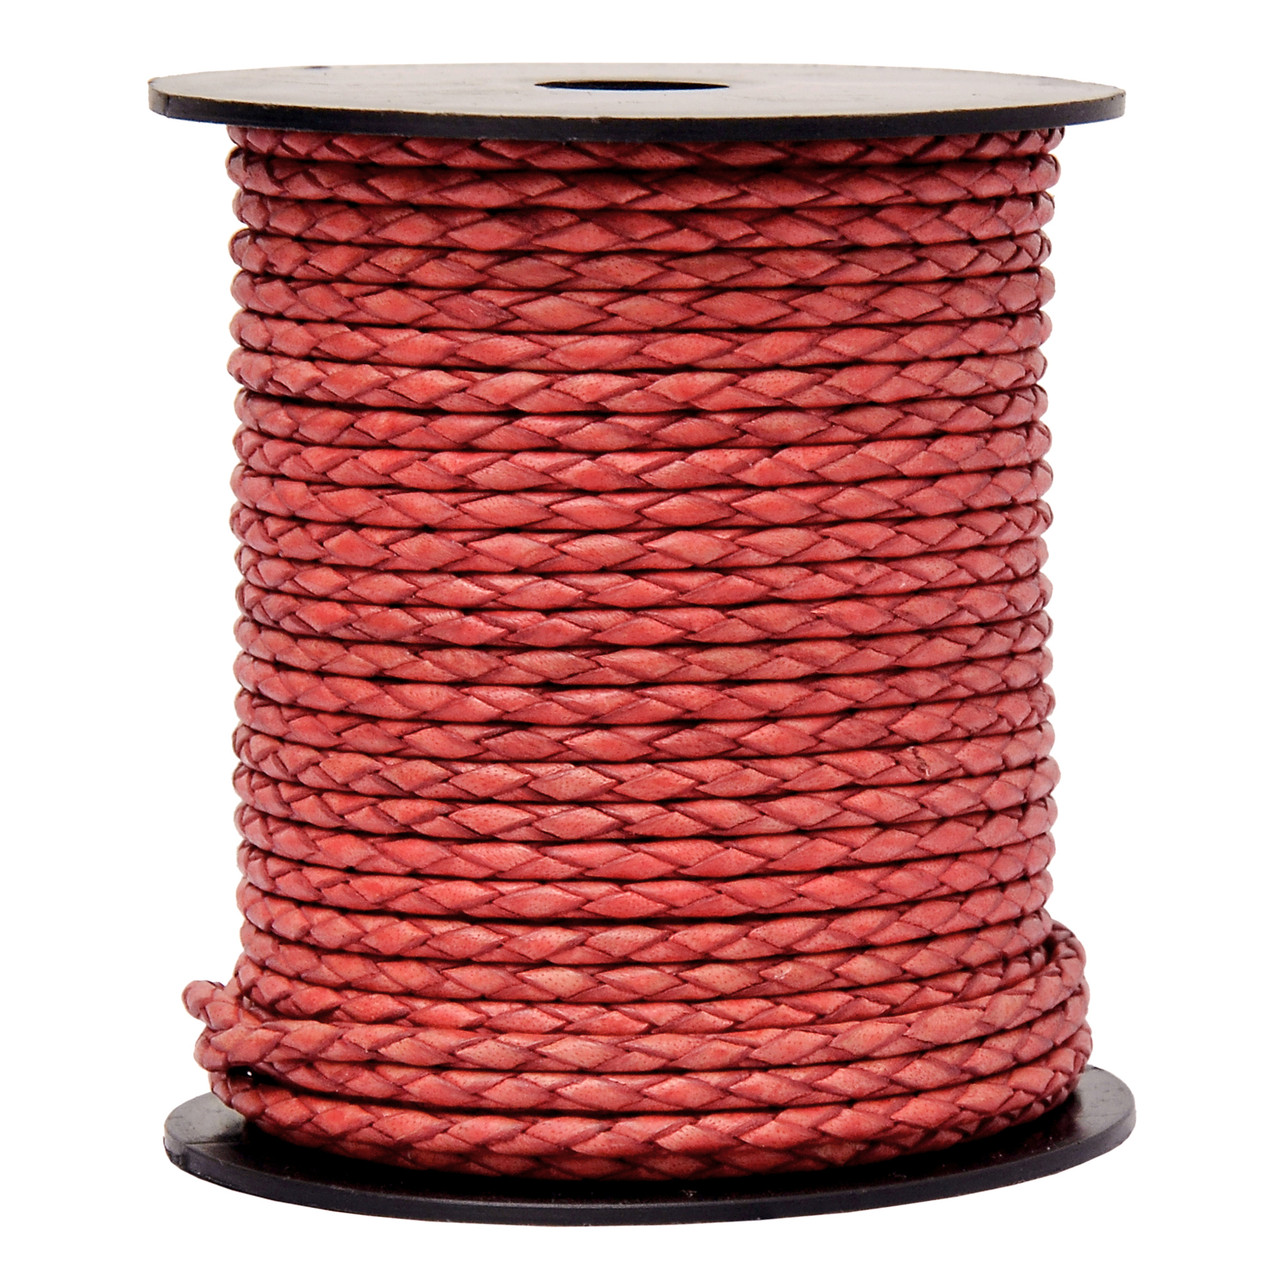 Round braided leather cord Ø6,0mm - black+red, 8,49 €